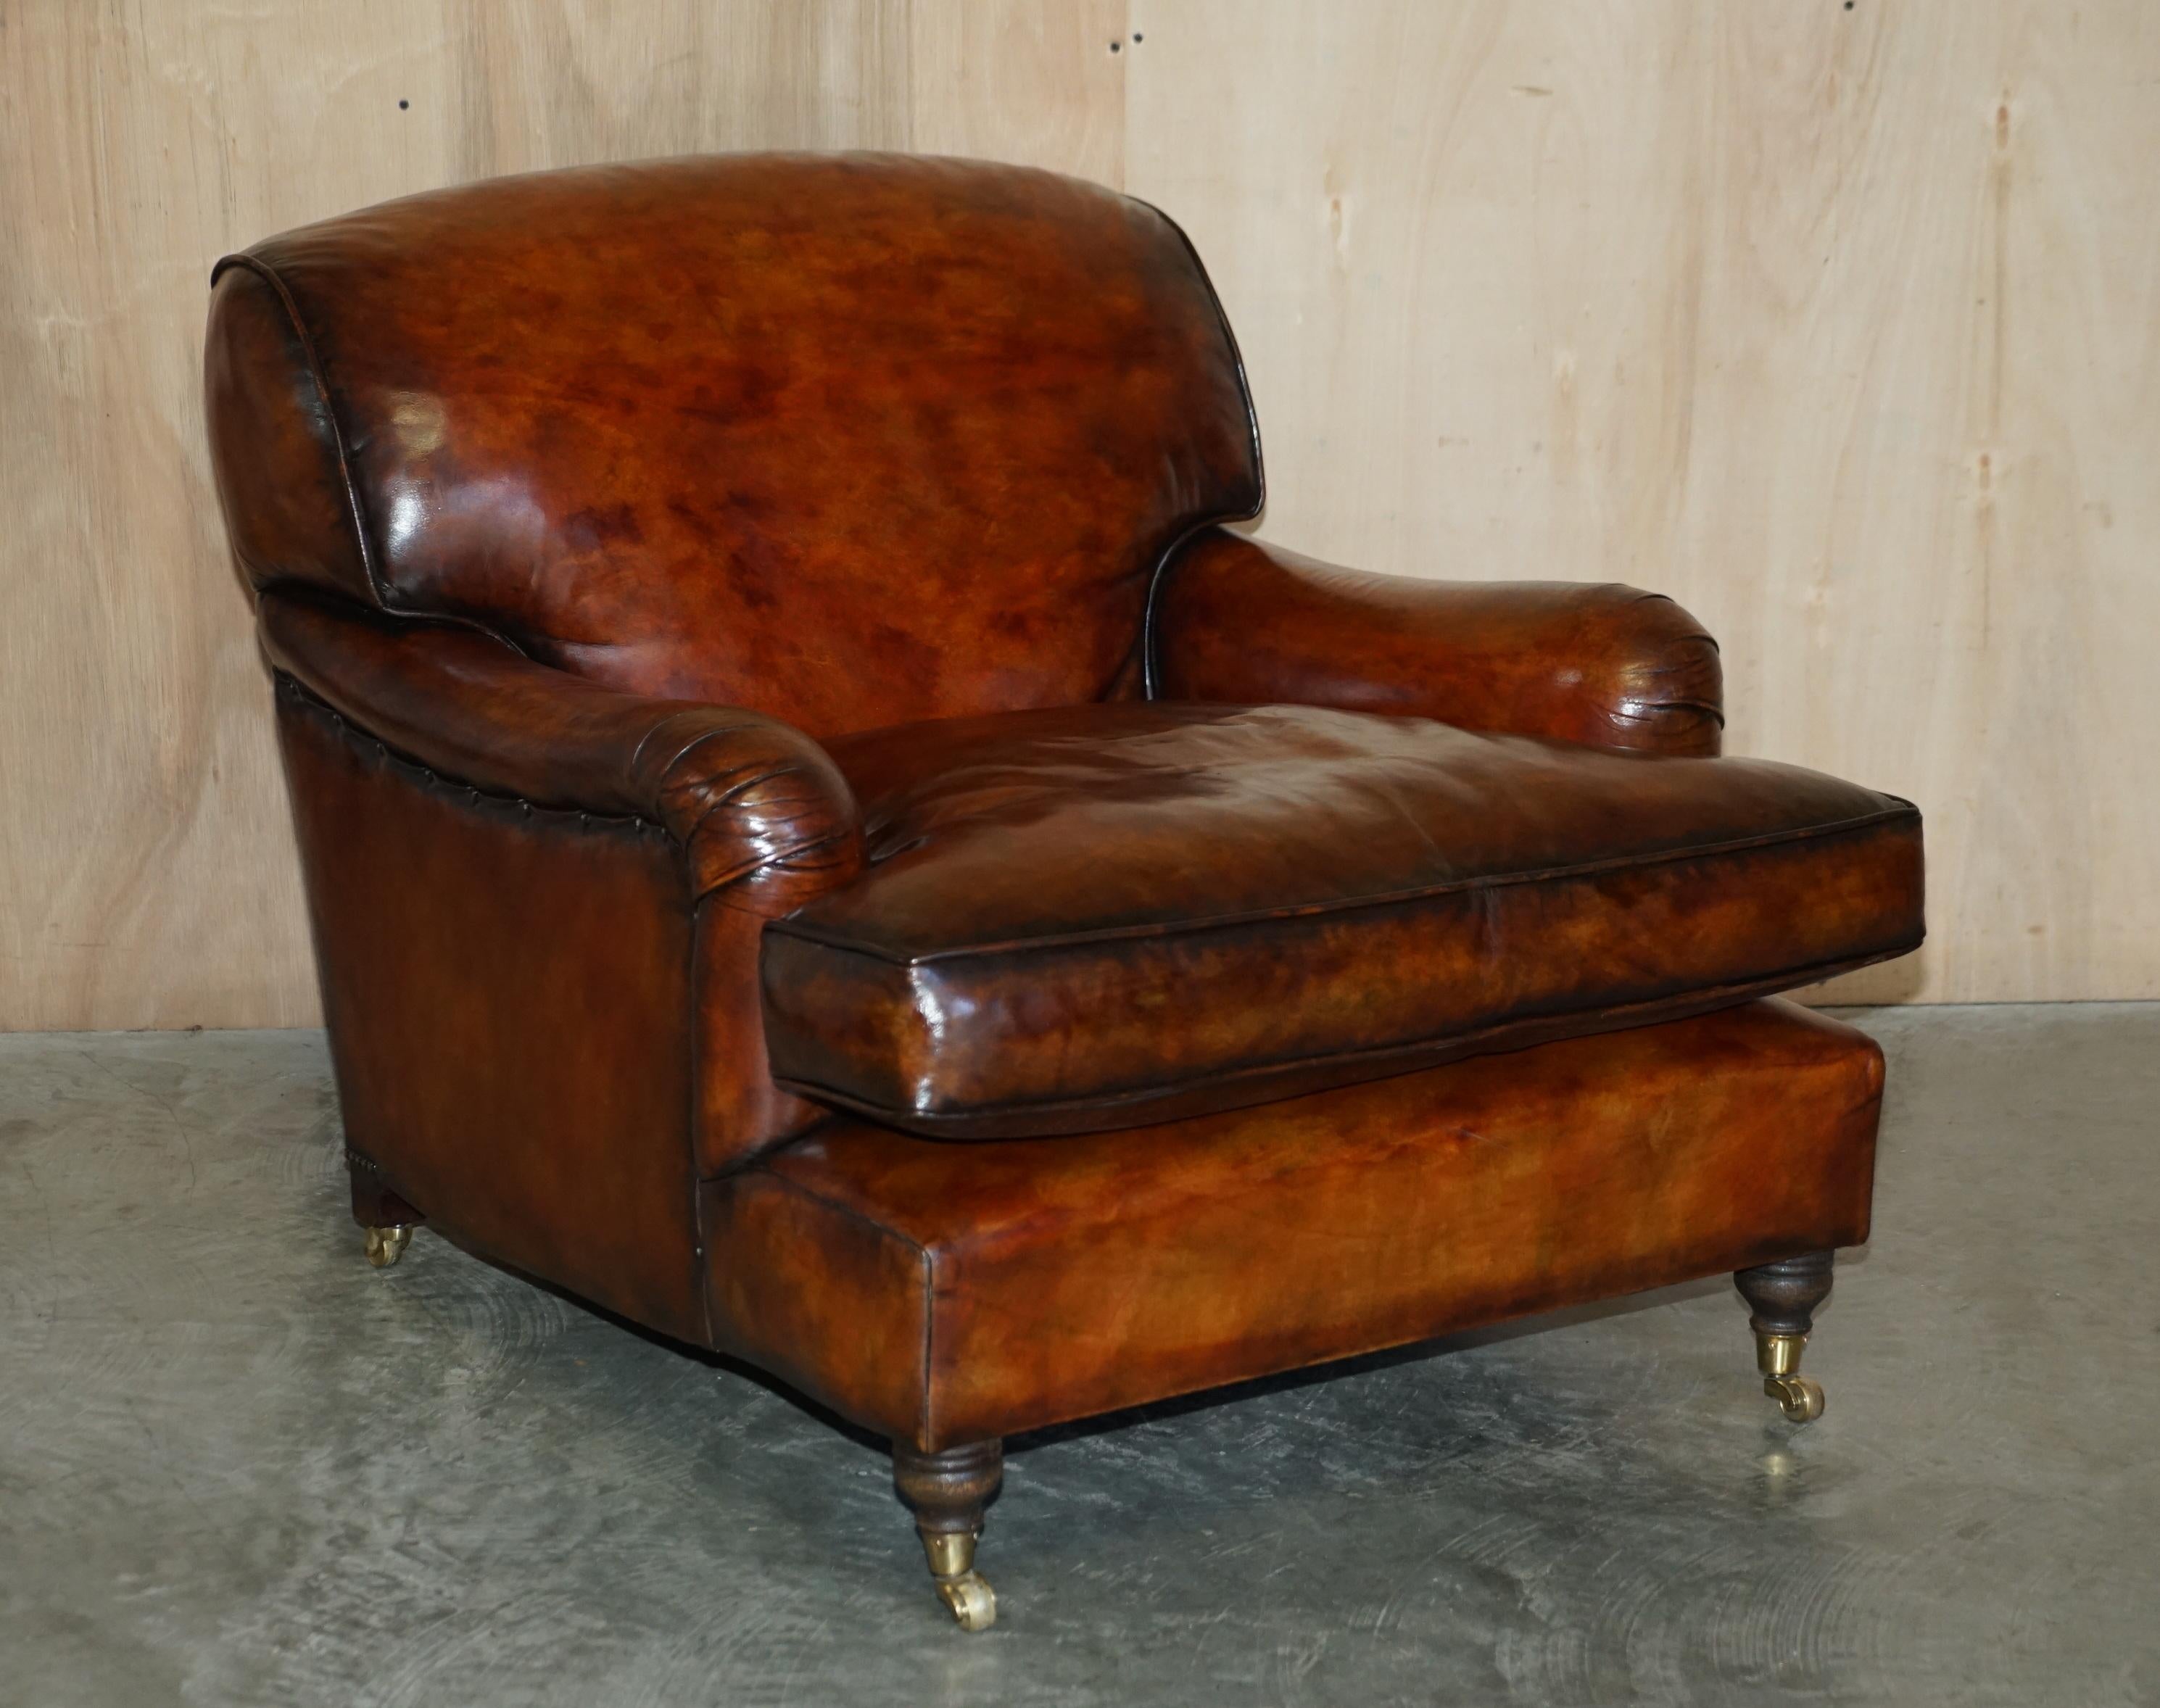 We are delighted to offer for sale this sublime large pair of fully restored Howard George Smith style Signature Scroll Arm cigar brown leather armchairs with oversized feather filled cushions.

These are just about the finest armchairs available